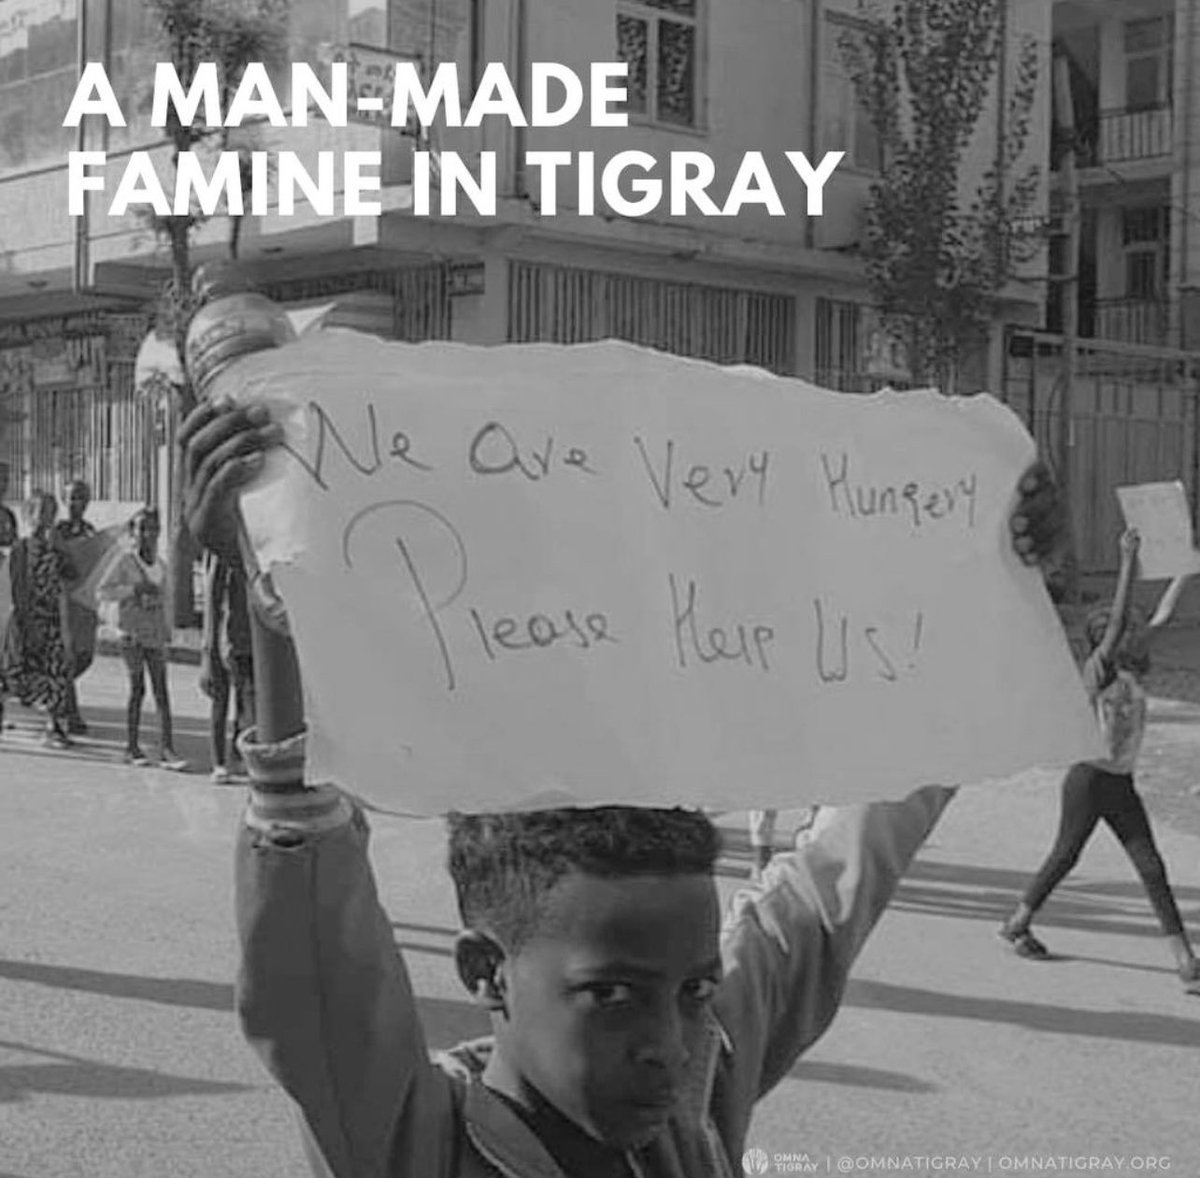 👉Why isn't Tigray on Z headlines of midea's in the 🌍?

Why do 🌍 chose silence over #TigrayGenocide?

We demand🌍 wide eye to
🚩Avert #TigrayFamine
🚩 #UpholdPretoriaAgreement
🚩 #FreeAllTigray
@politico @tvnewser 
@YahooNews @TVGuide @TravelLeisure @DiscoverMag
@Tigray121032